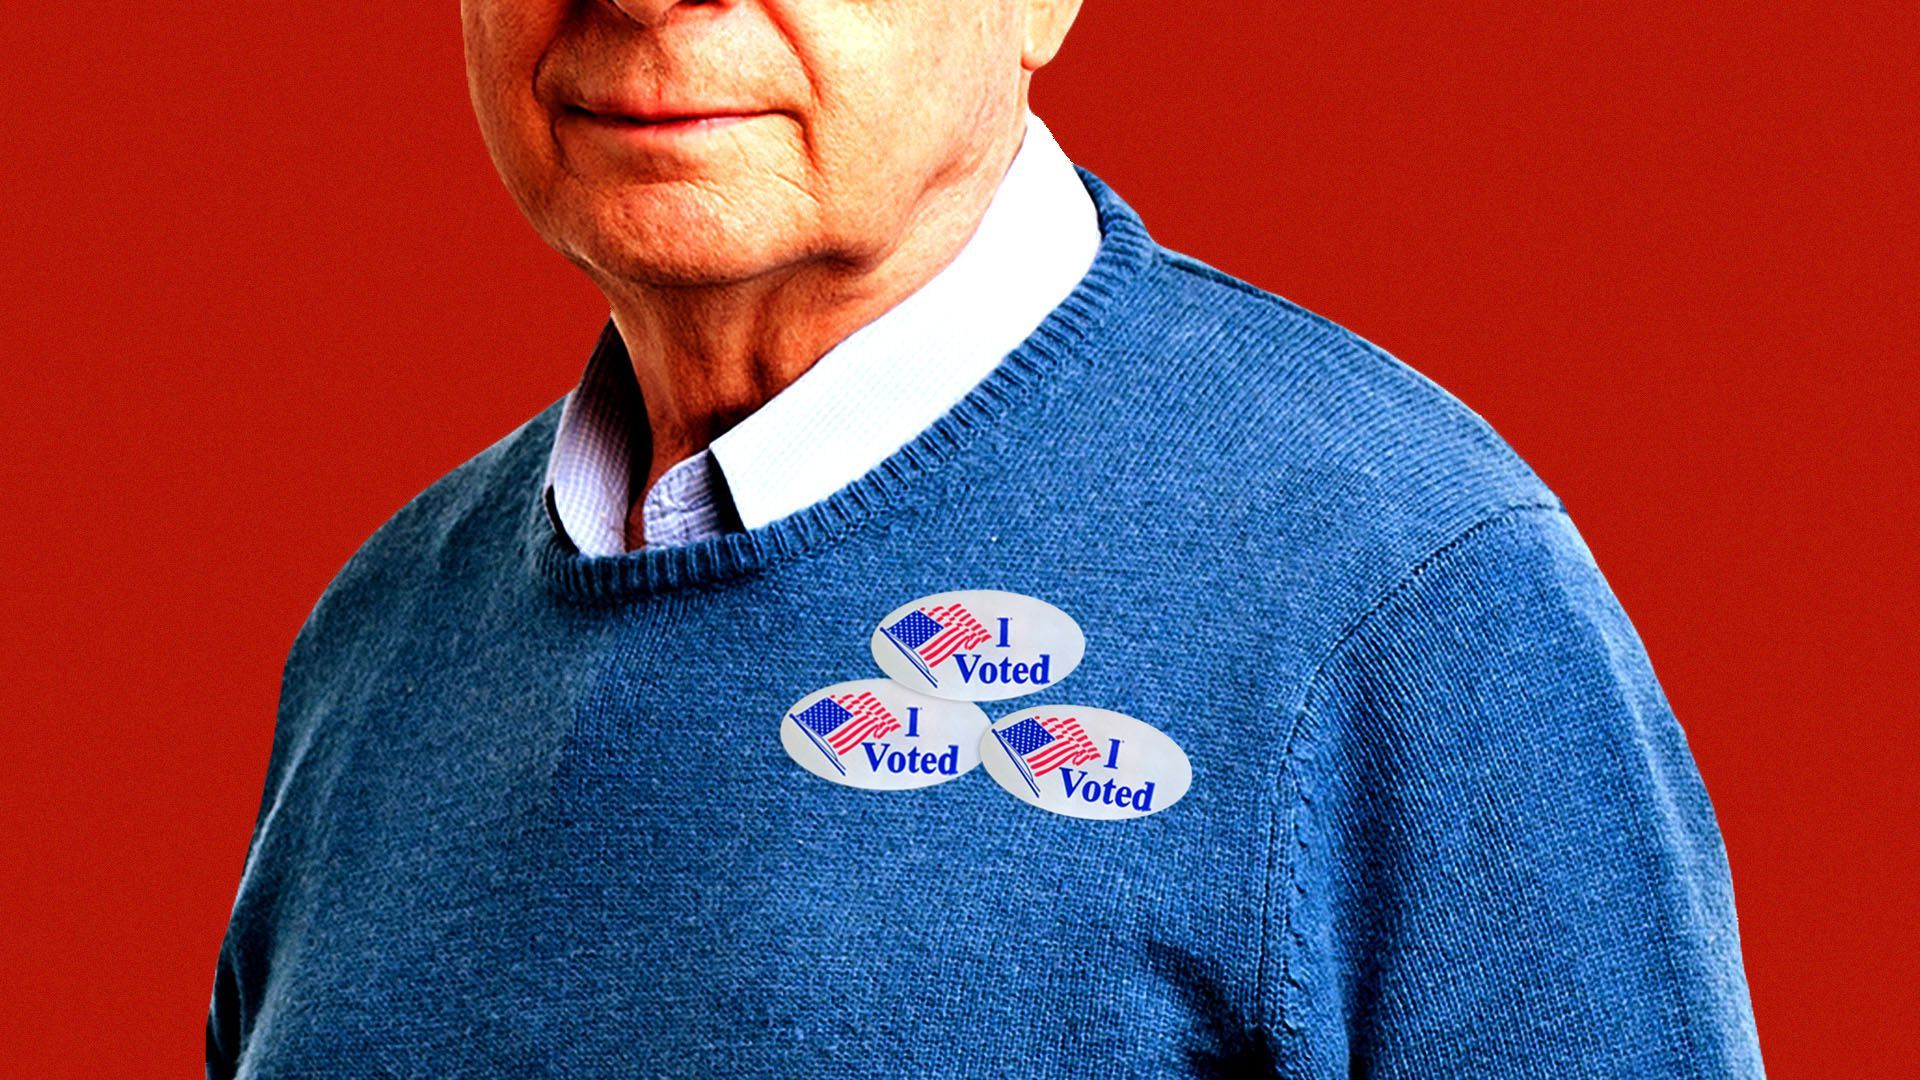 Illustration of a senior man wearing 3 "I voted" stickers.